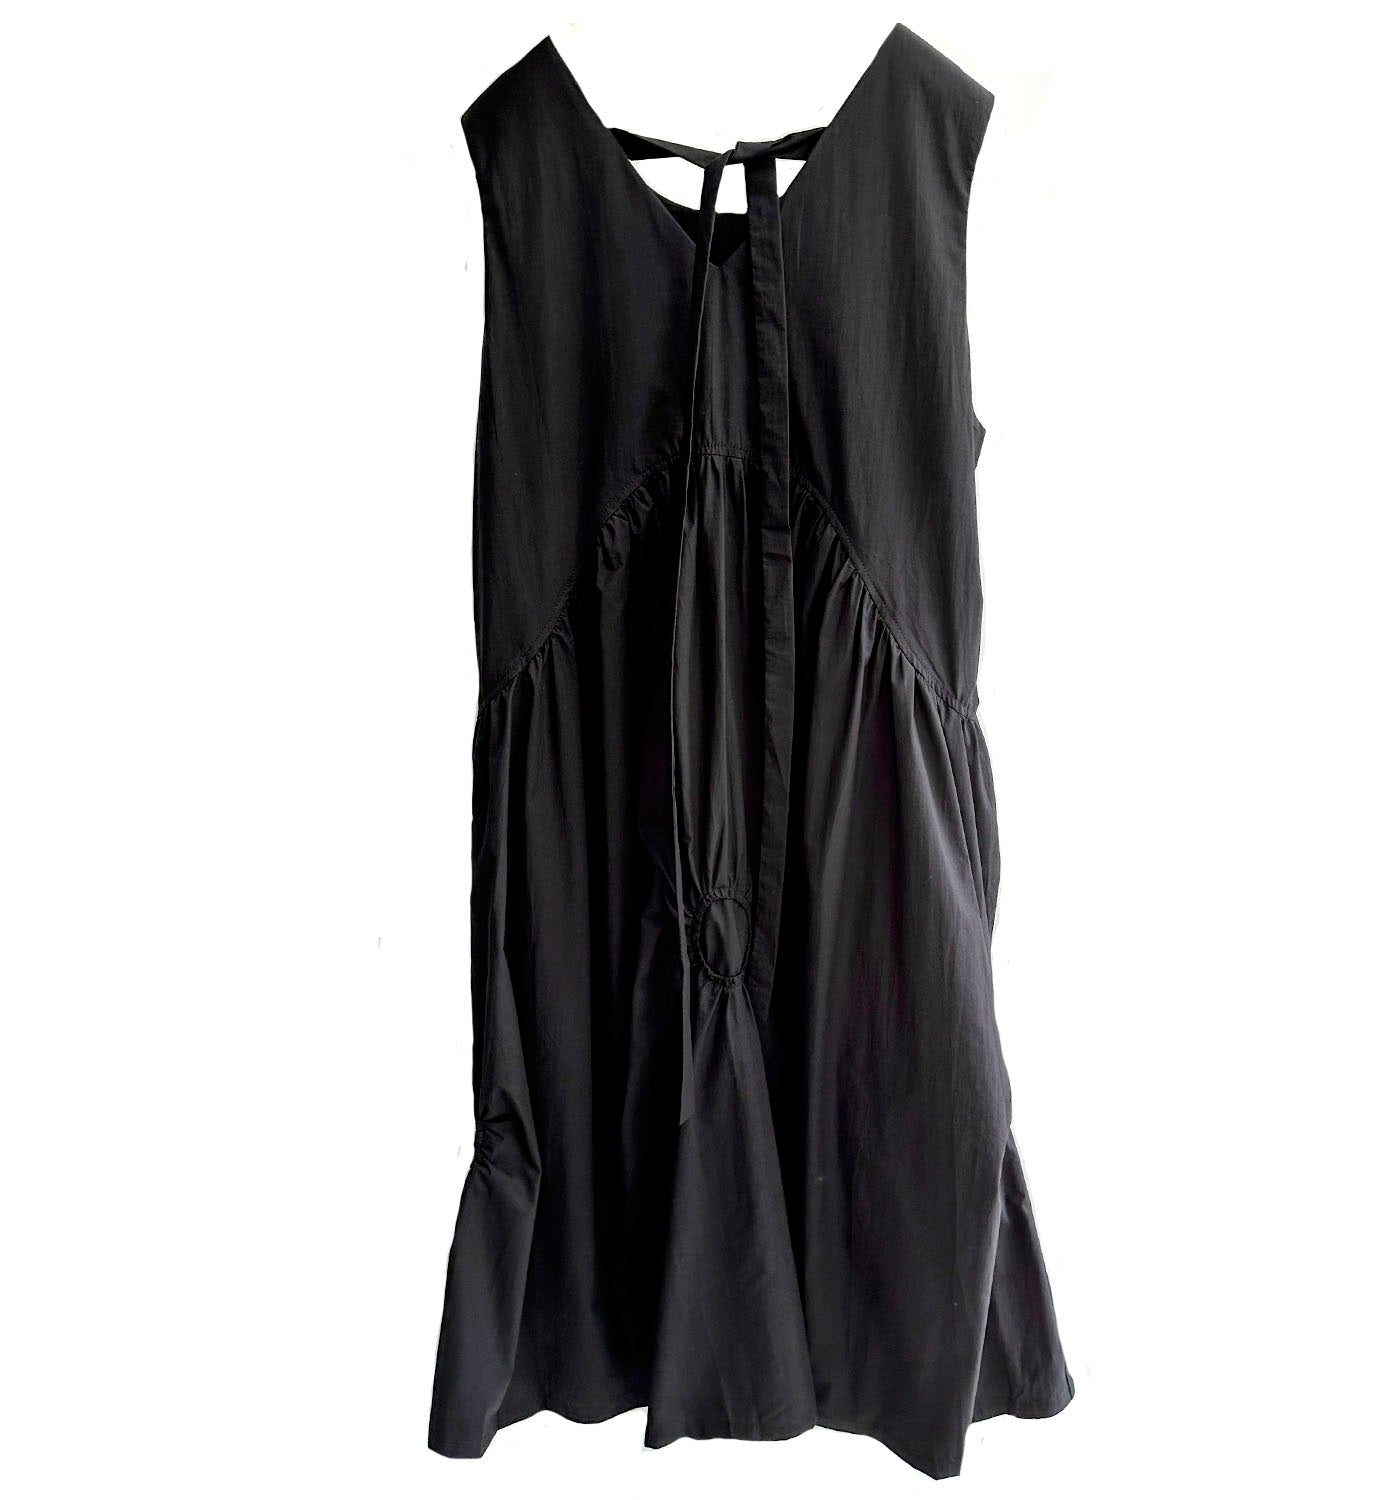 Tie Back Ruched Dress - DIGS